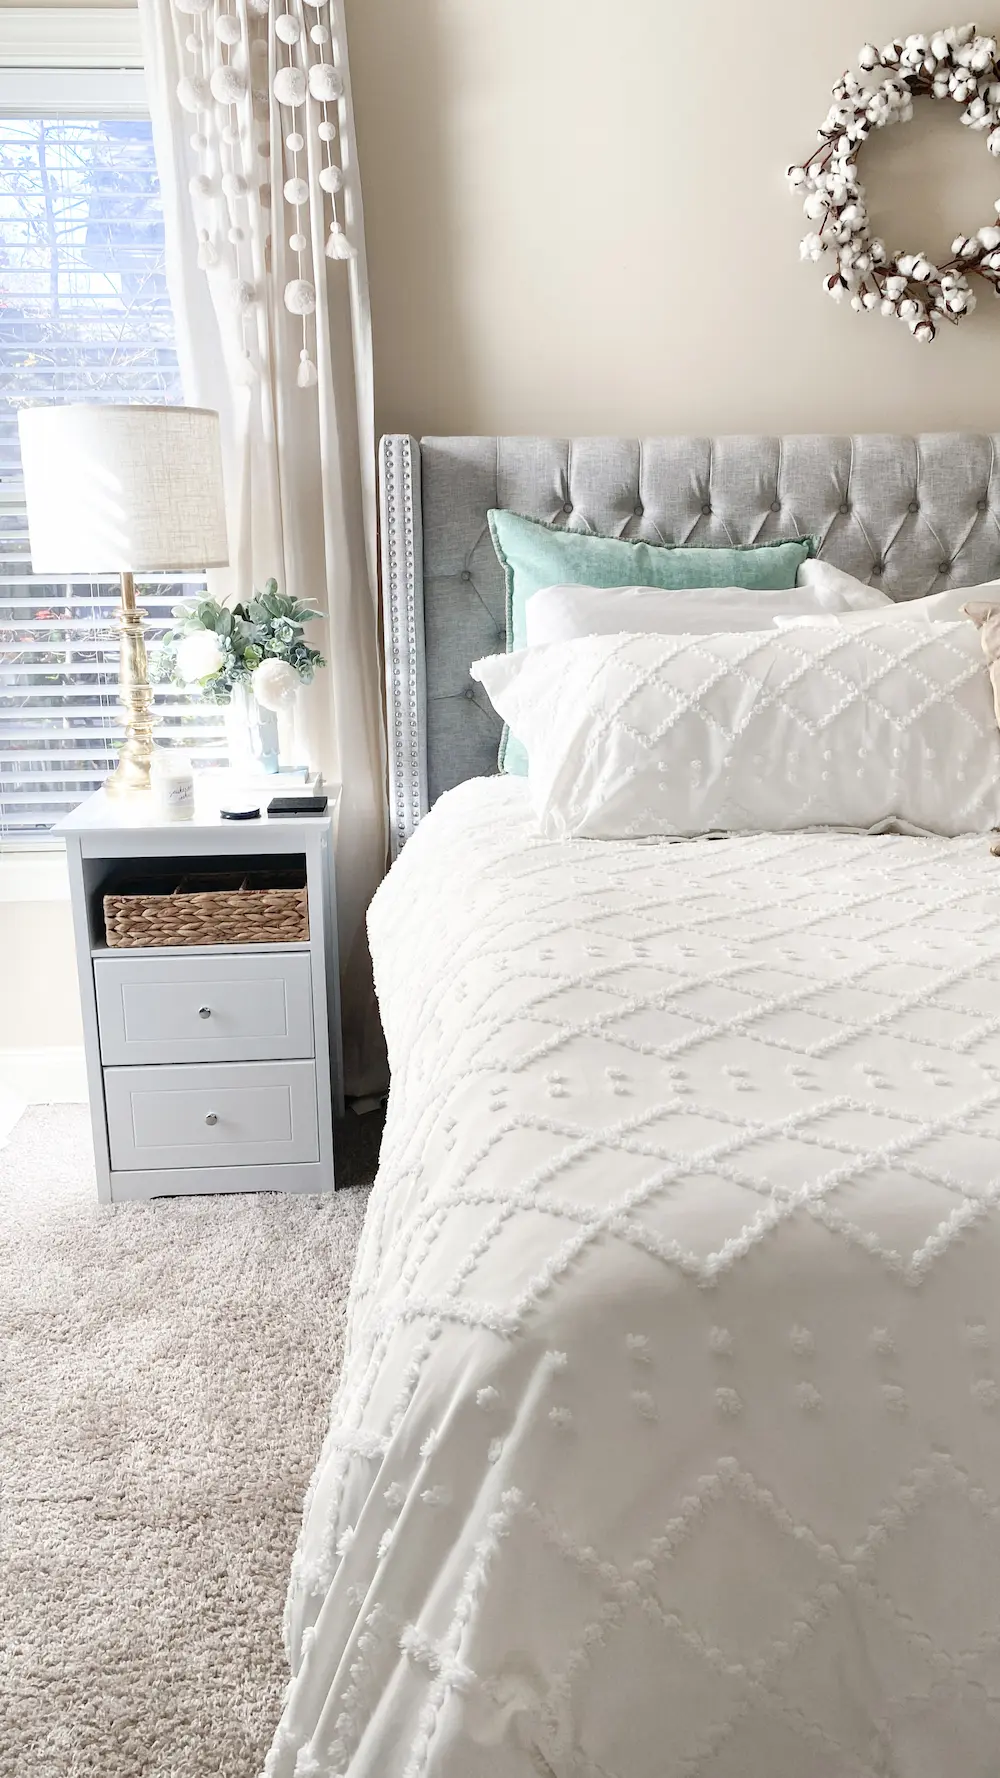 A neatly arranged bedroom with a tufted headboard, white bedding, and a side table with decorative items.